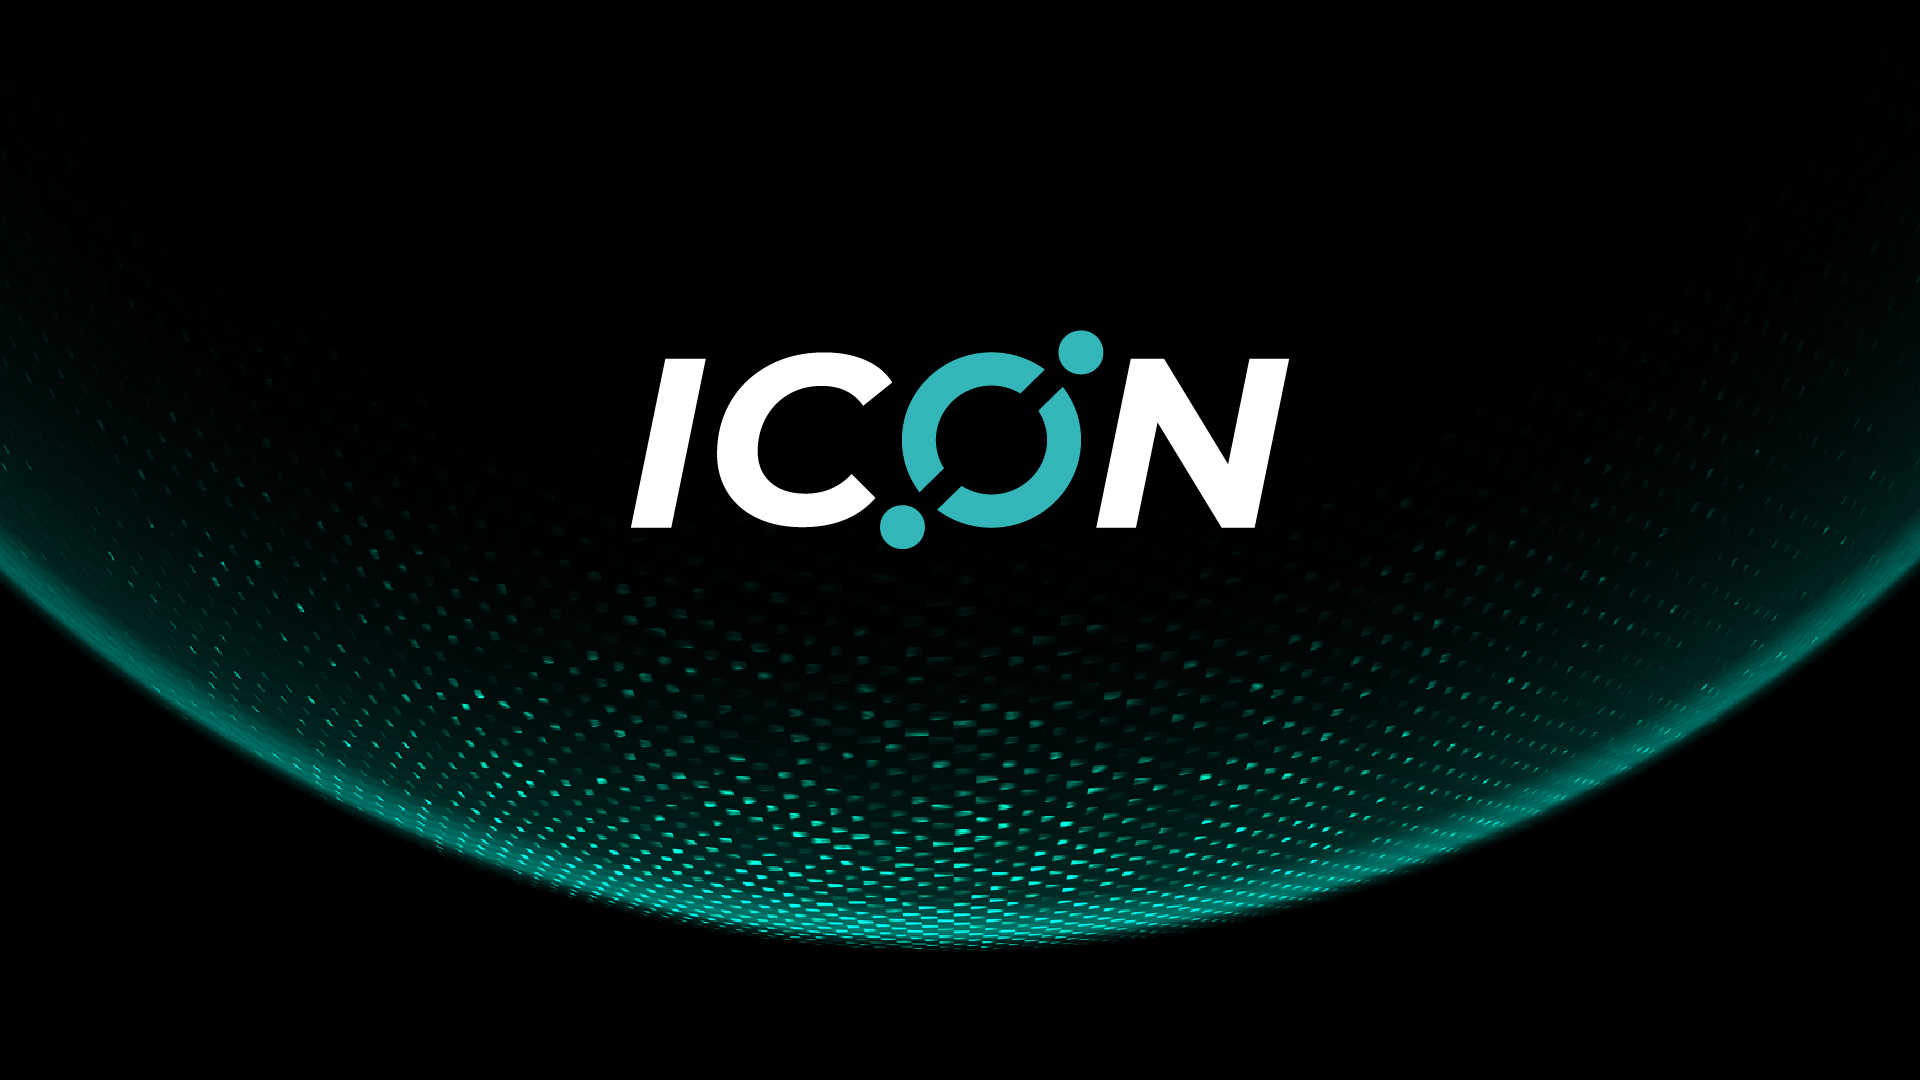 ICON is an open-source layer 1 delegated proof-of-stake (DPoS) blockchain and smart contract platform focused on connecting unique blockchains and their respective communities.